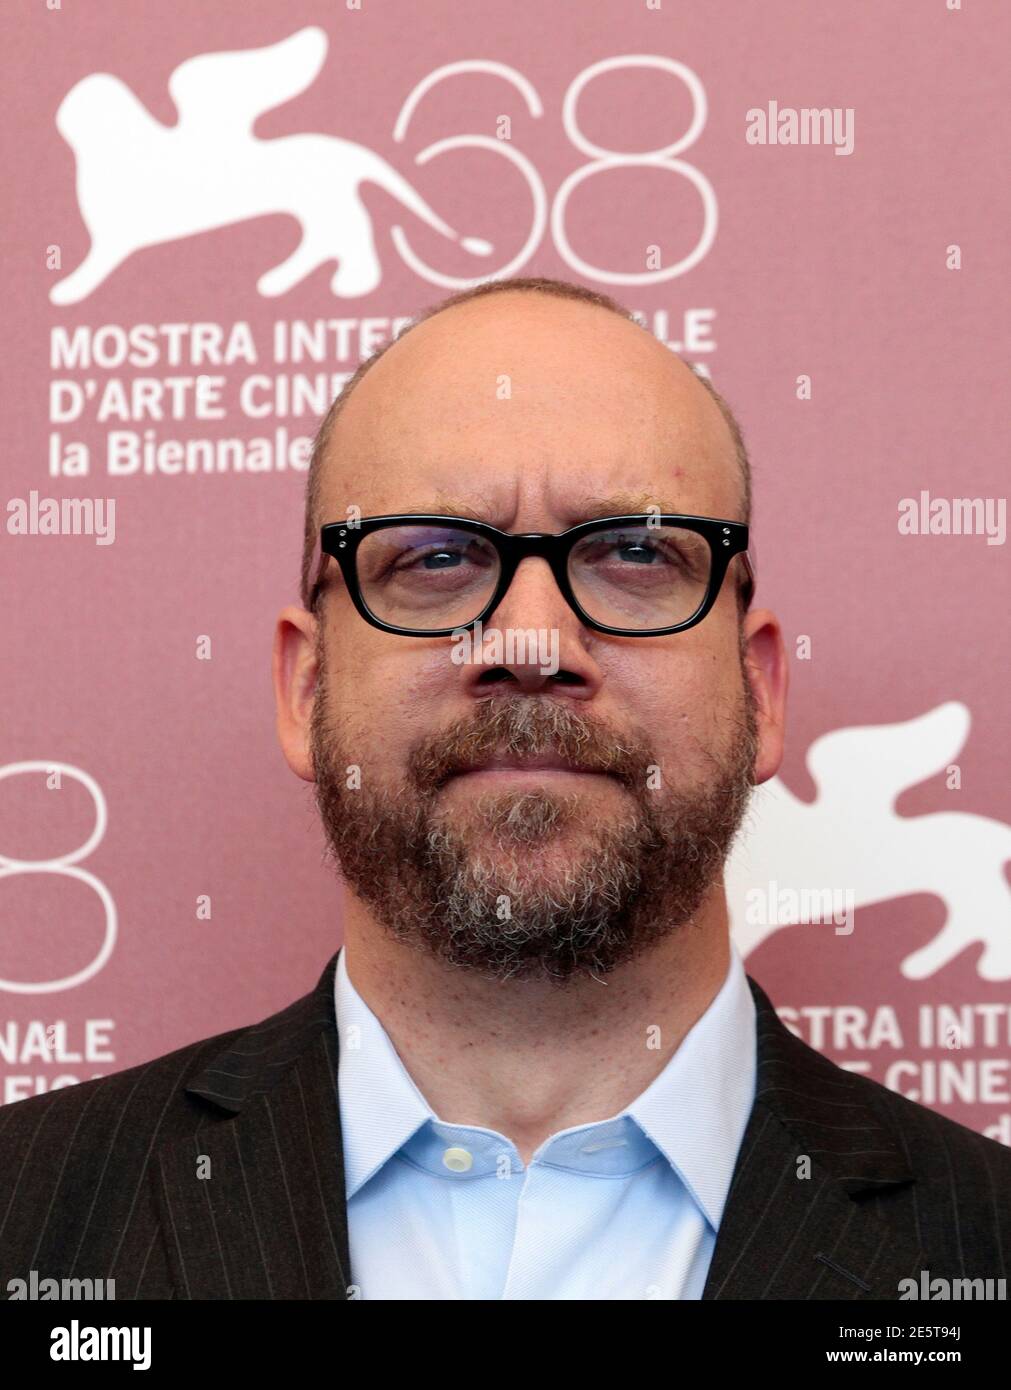 Actor Paul Giamatti poses during a photocall for the film  'The Ides of March' at the 68th Venice Film Festival in Venice August 31, 2011. REUTERS/Alessandro Bianchi  (ITALY - Tags: ENTERTAINMENT HEADSHOT) Stock Photo